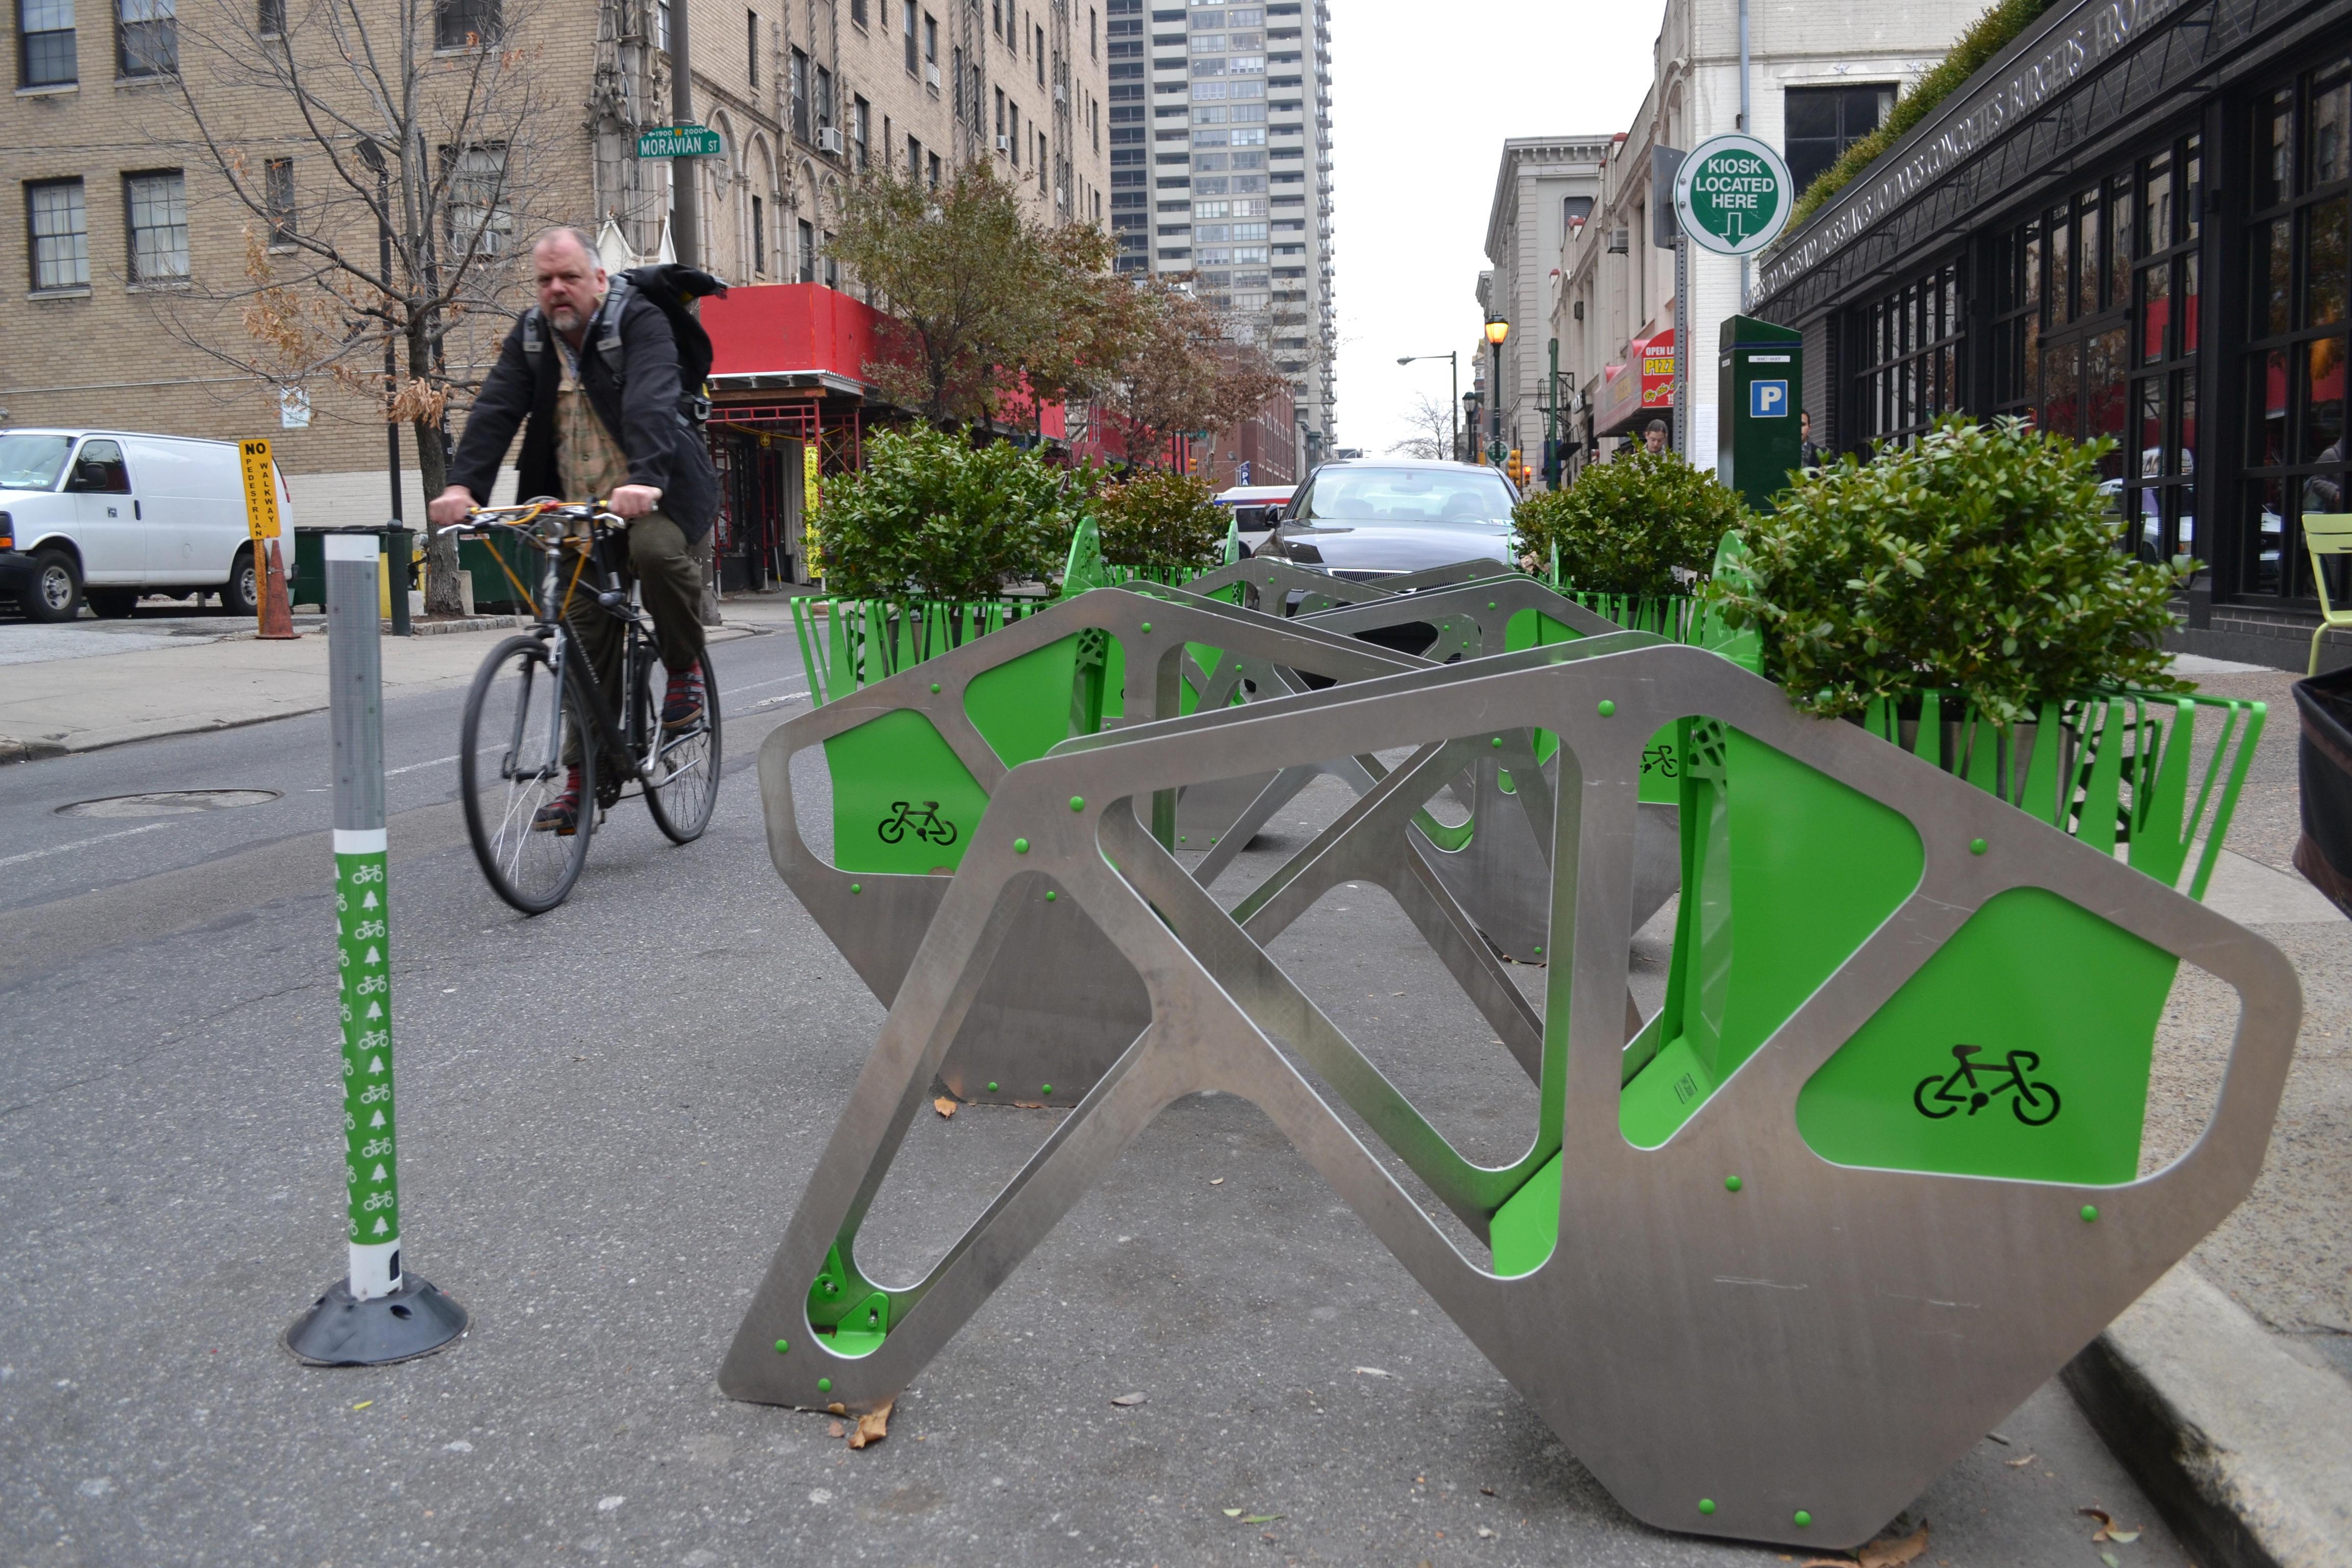 Shake Shack bought and installed a bike corral for its Center City location.